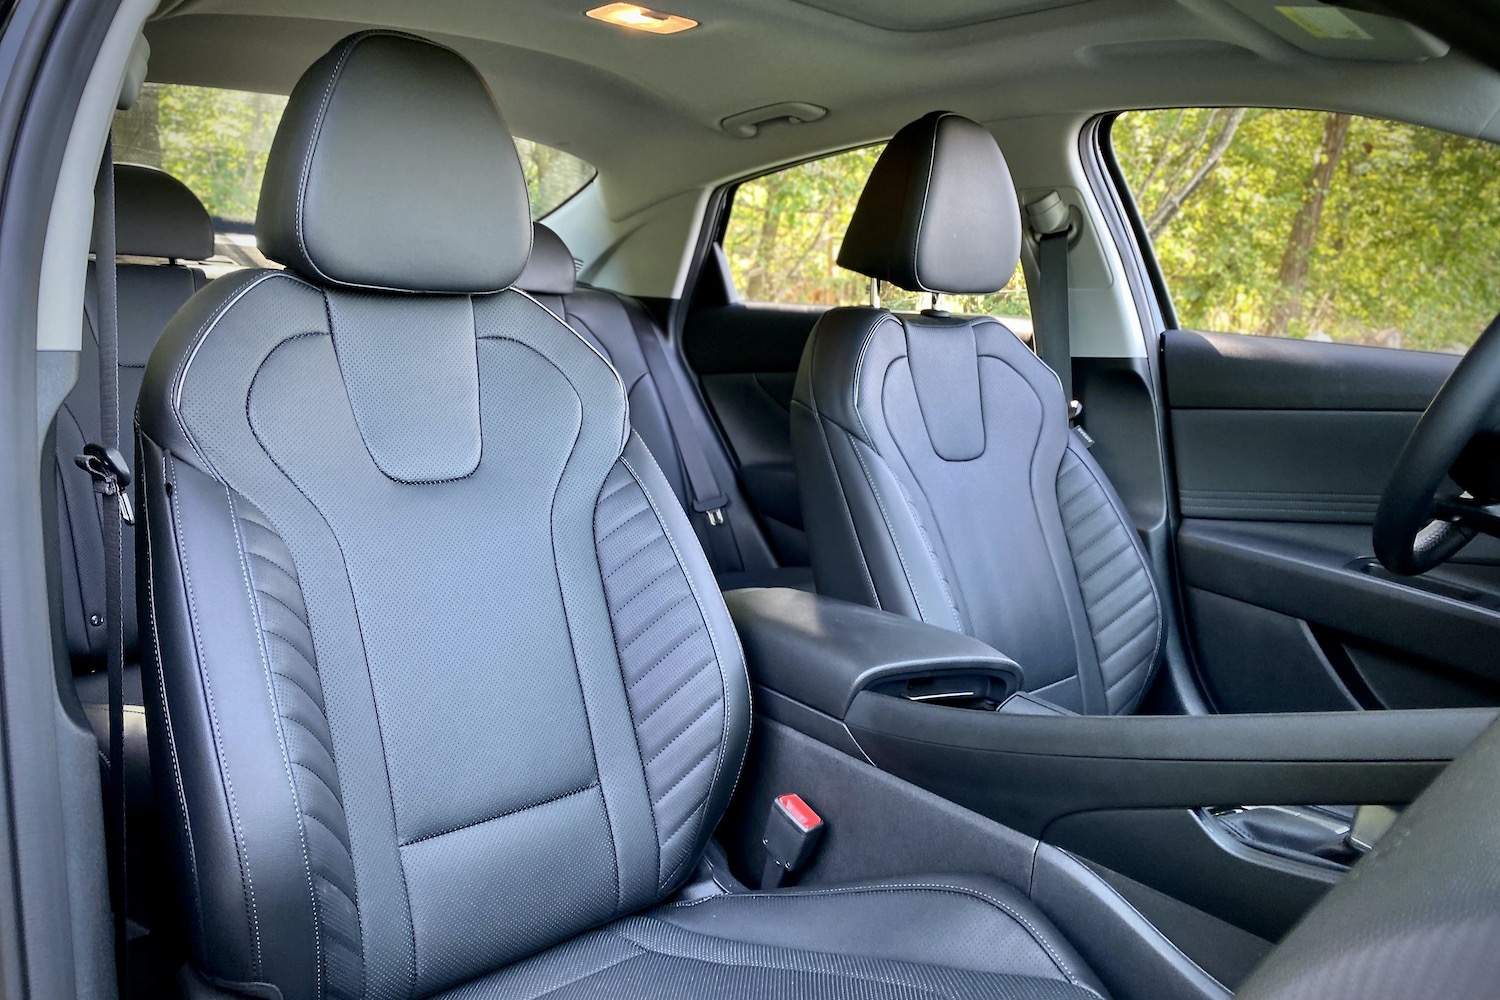 Front passenger seat in the 2021 Hyundai Elantra Hybrid from the front.